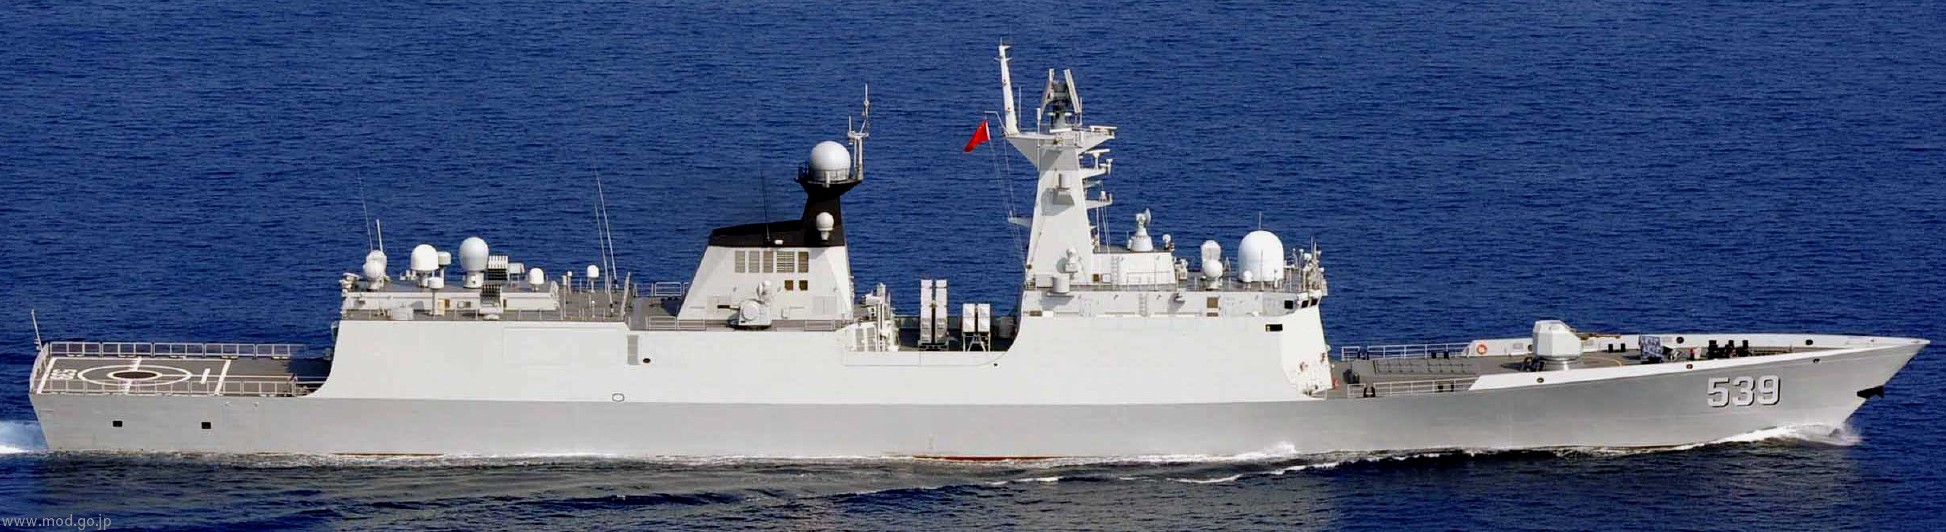 ffg-539 plans wuhu type 054a jiangkai ii class guided missile frigate china people's liberation army navy 03